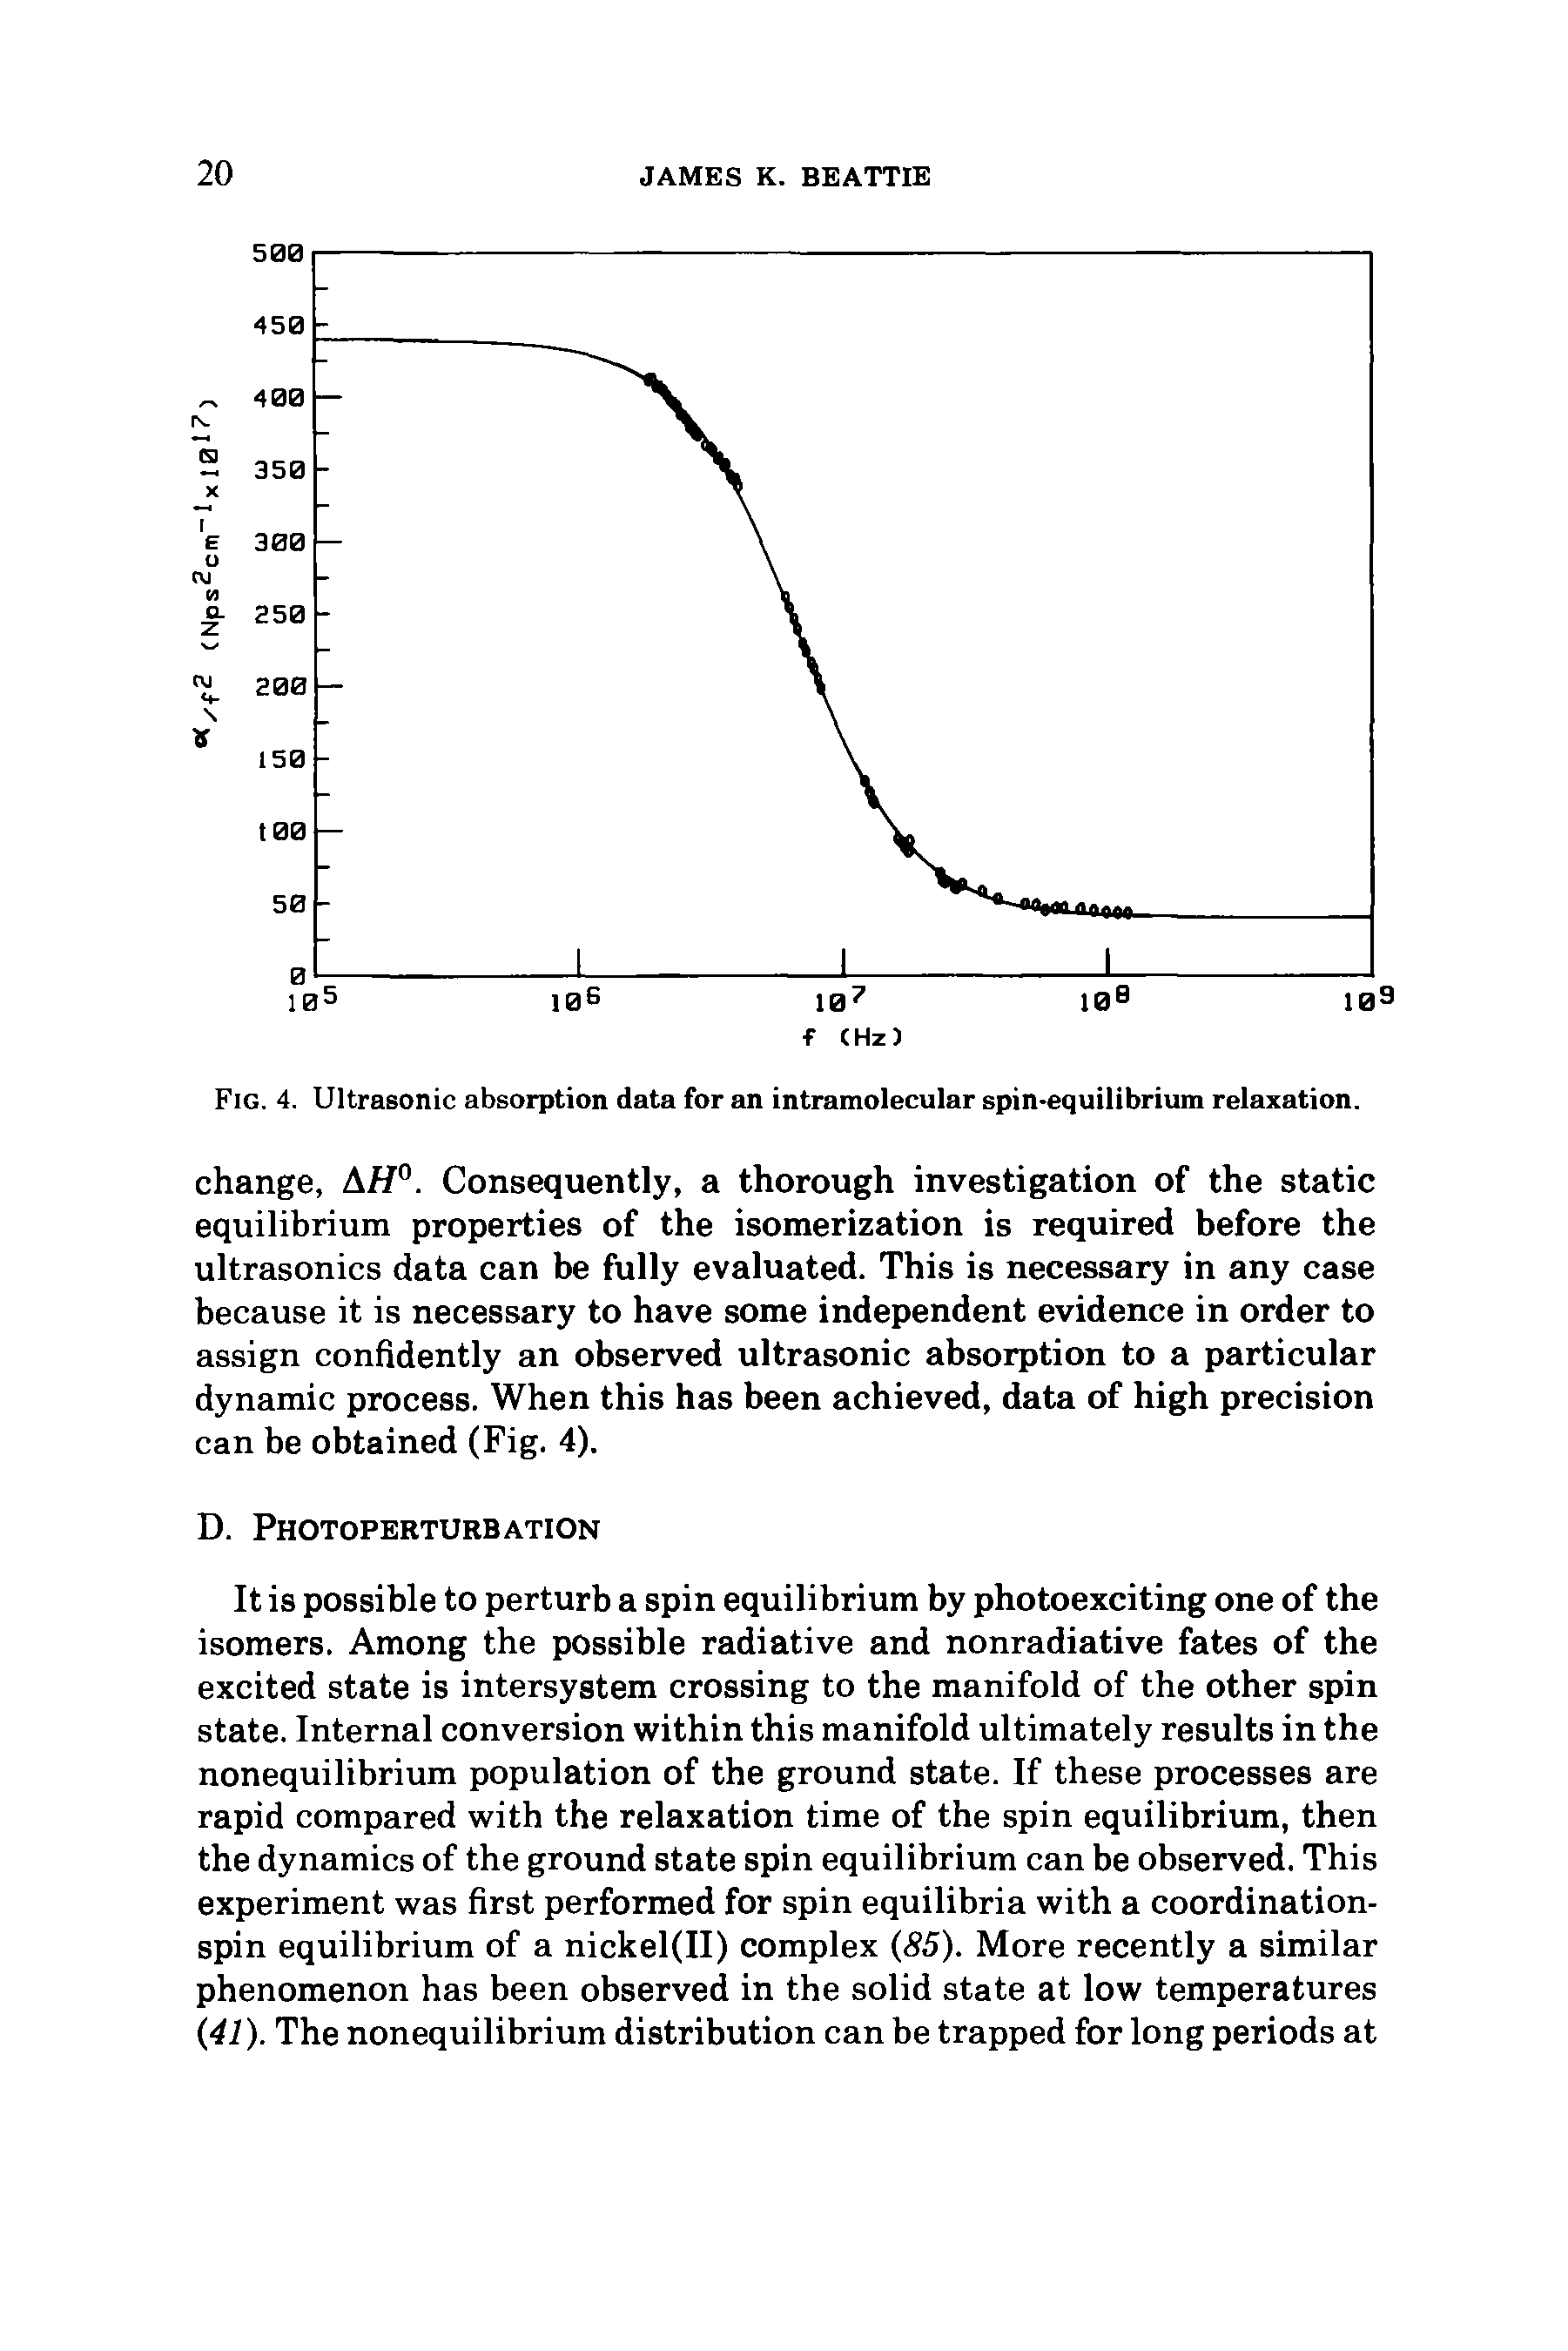 Fig. 4. Ultrasonic absorption data for an intramolecular spin-equilibrium relaxation.